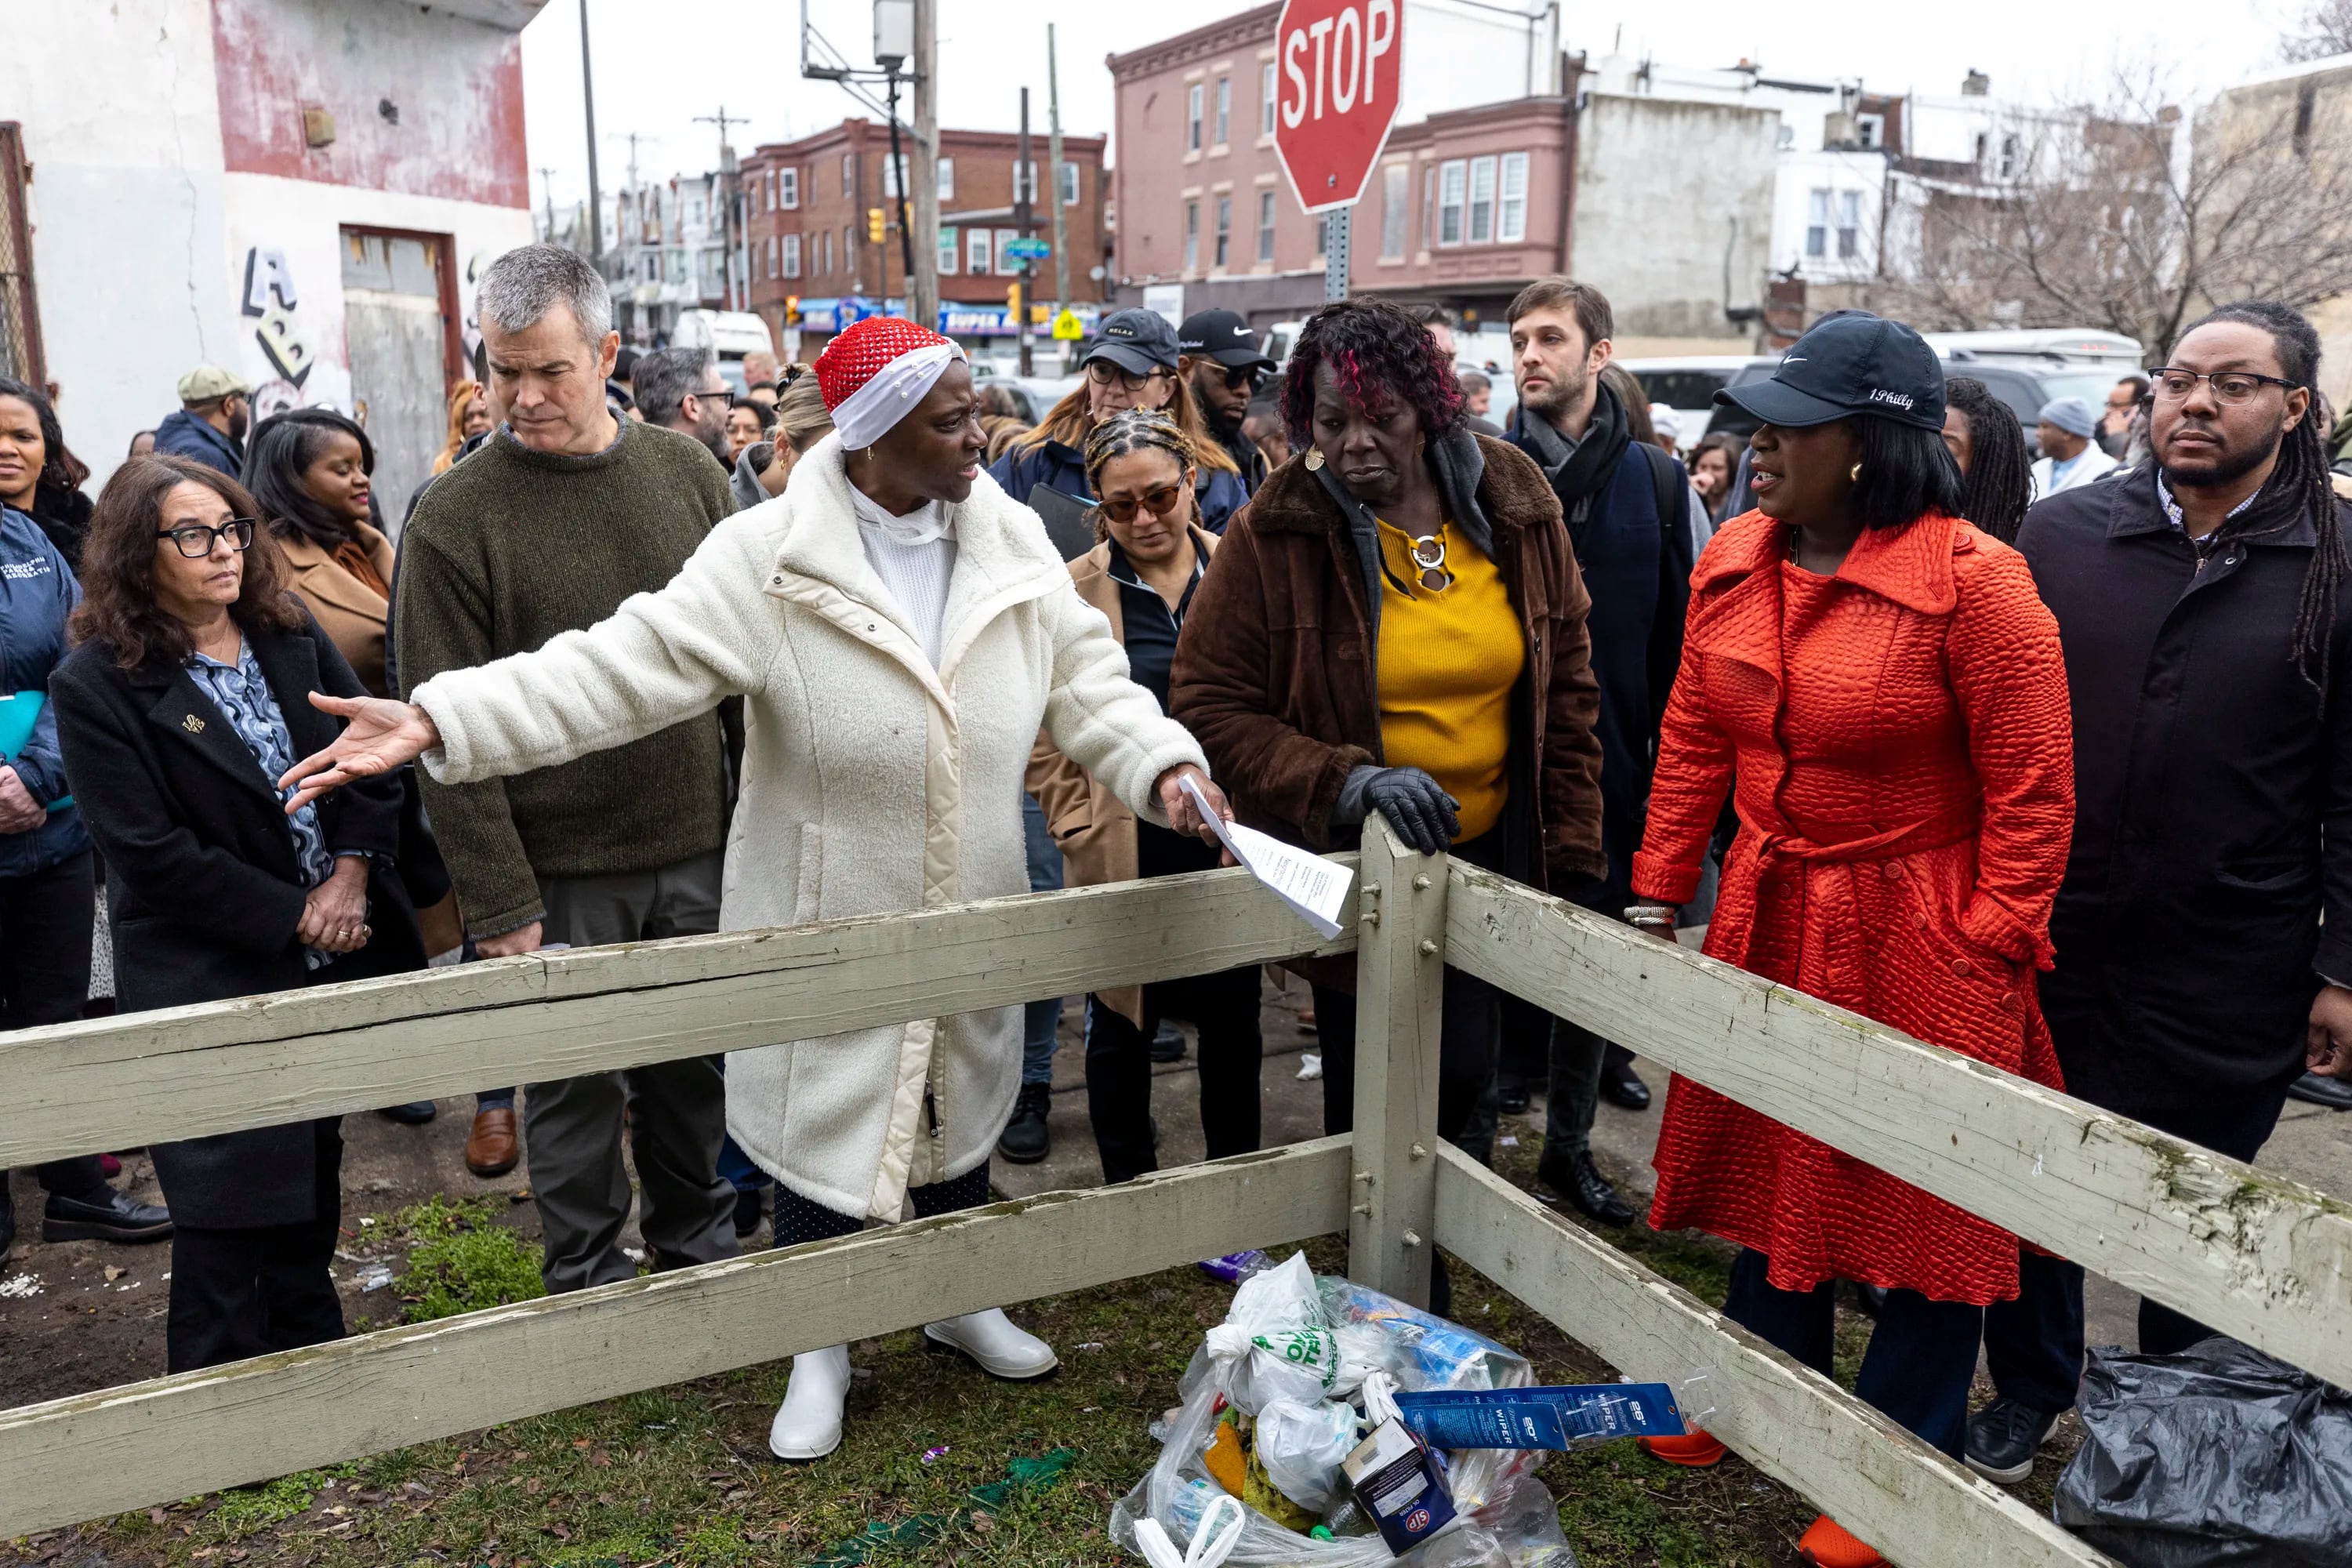 Bonita Cummings, Head of Strawberry Mansion Community Concern, points out illegal dumping and litter seen across 29th Street to Mayor Cherelle L. Parker during a tour of Strawberry Mansion in February.